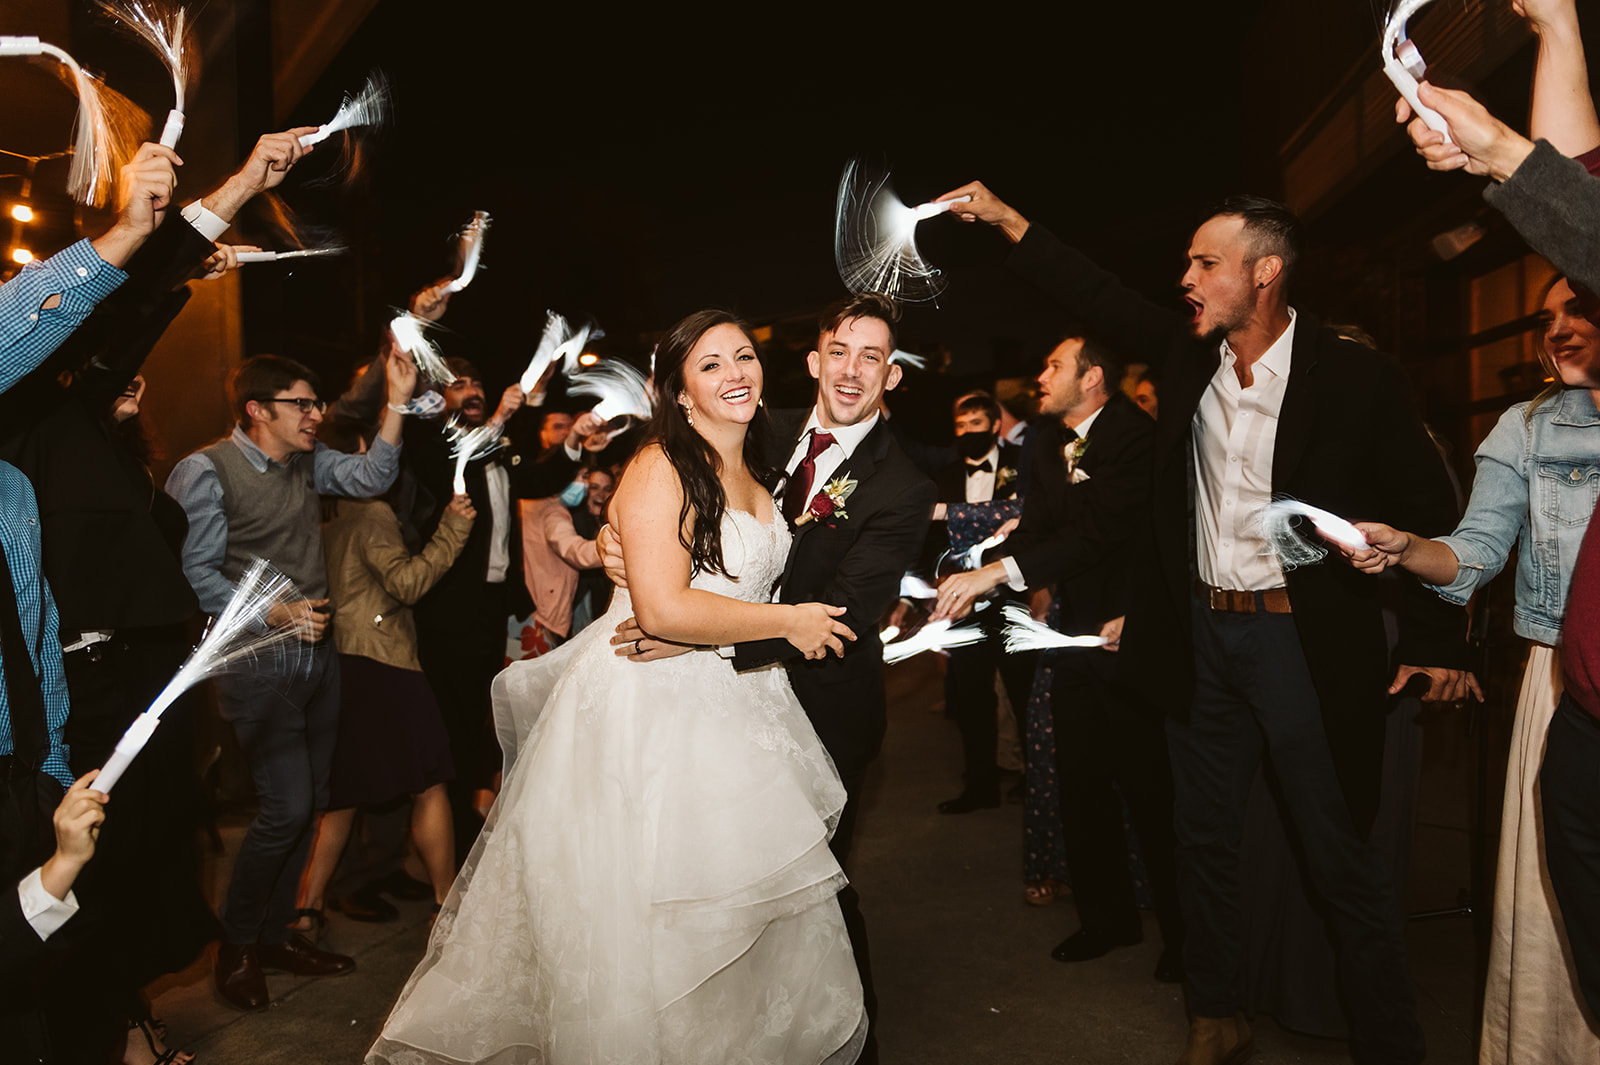 A bride and groom embrace under a glow stick exit at night.